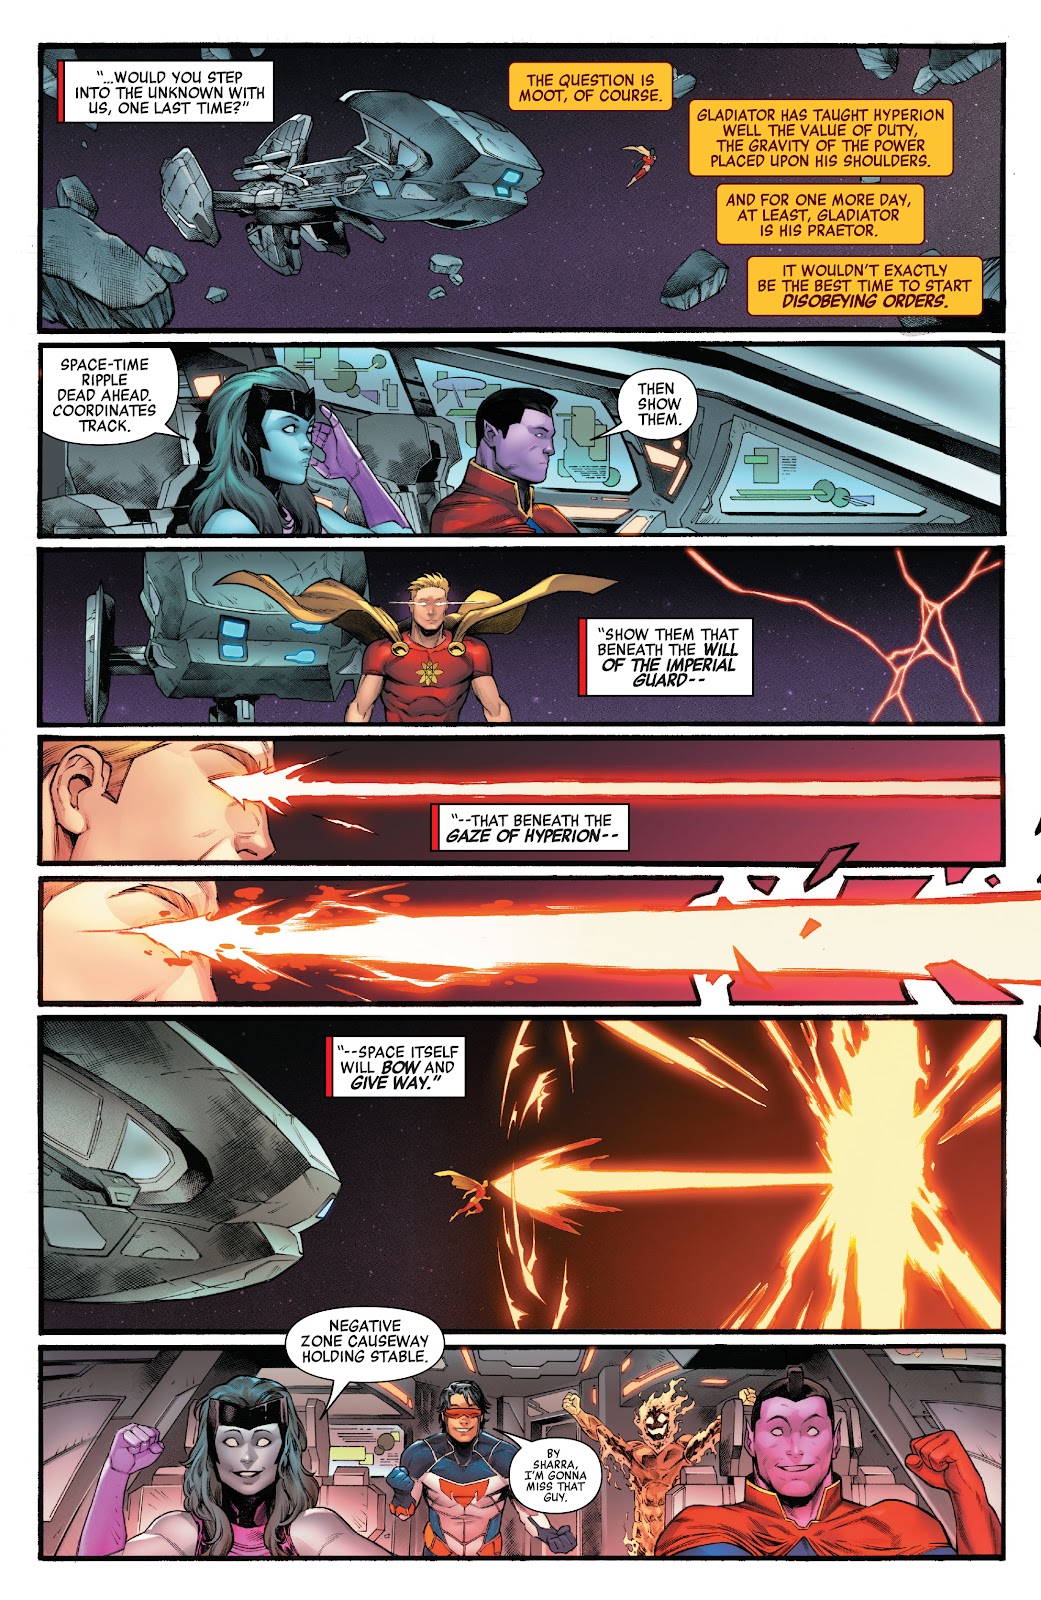 Heroes Reborn: One-Shots issue Hyperion & the Imperial Squad - Page 8